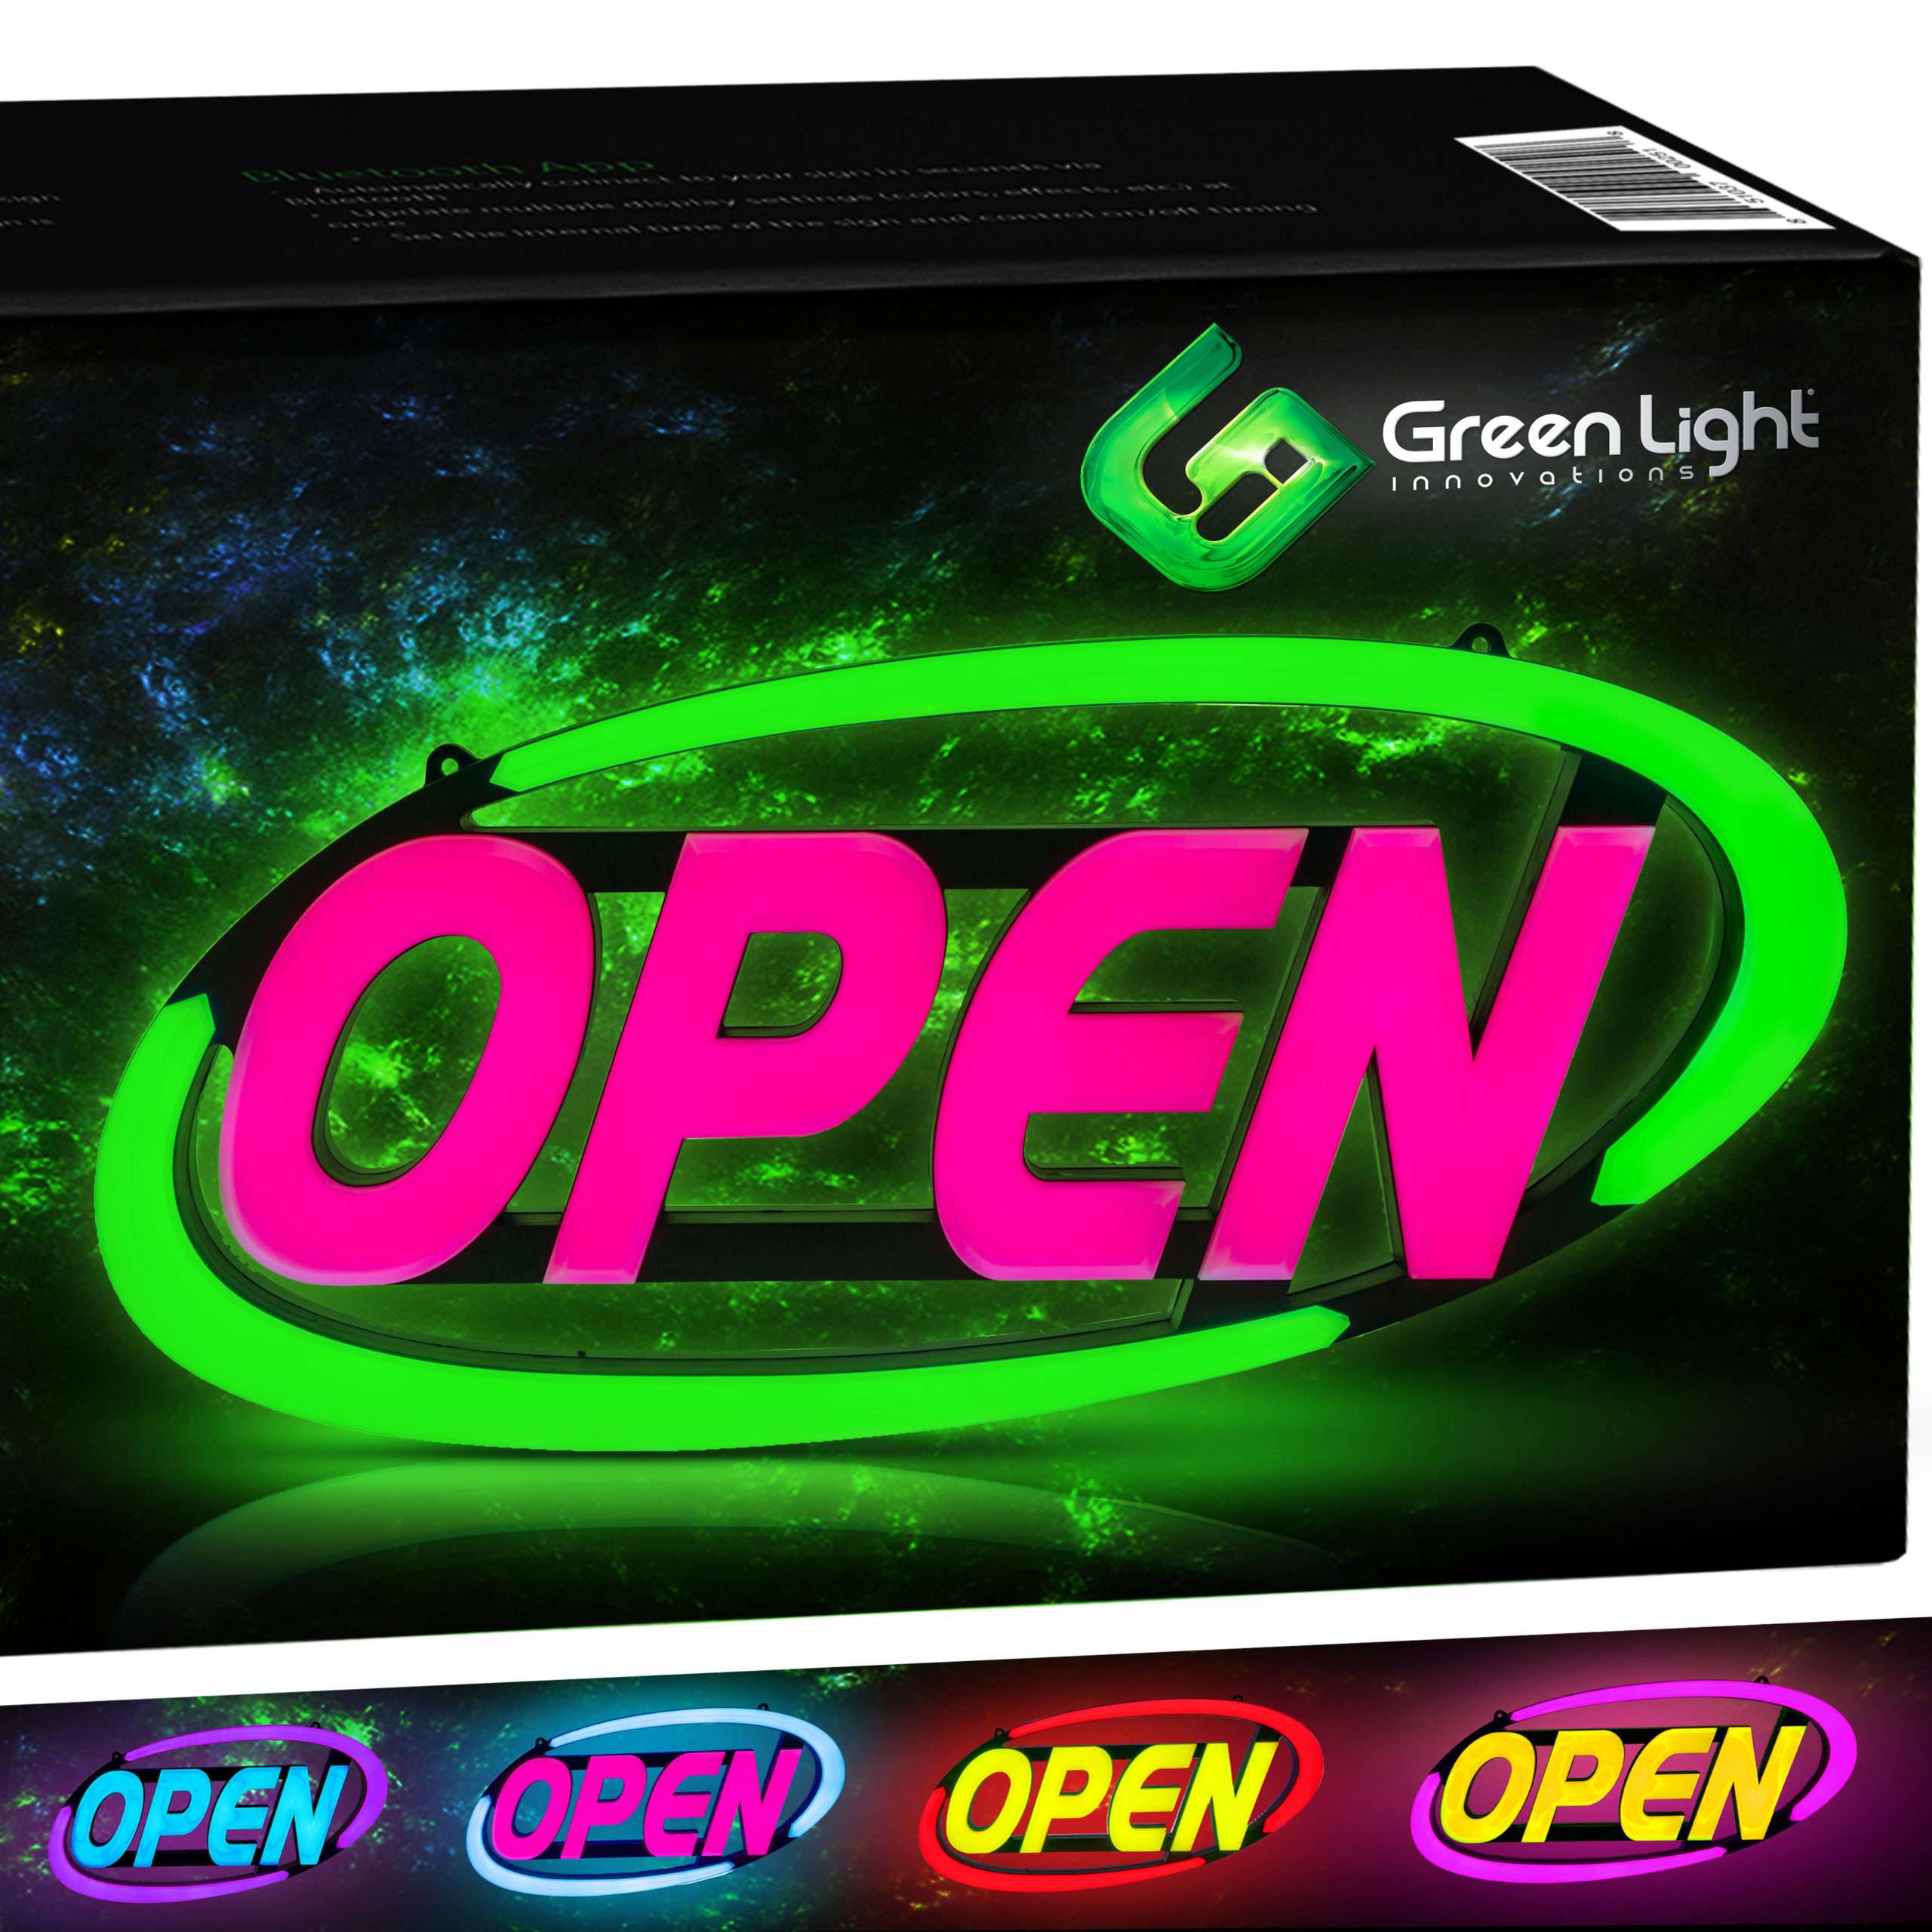 QUALITY FLASHING OPEN 24 HRS HOURS LED sign board new window shop sign 